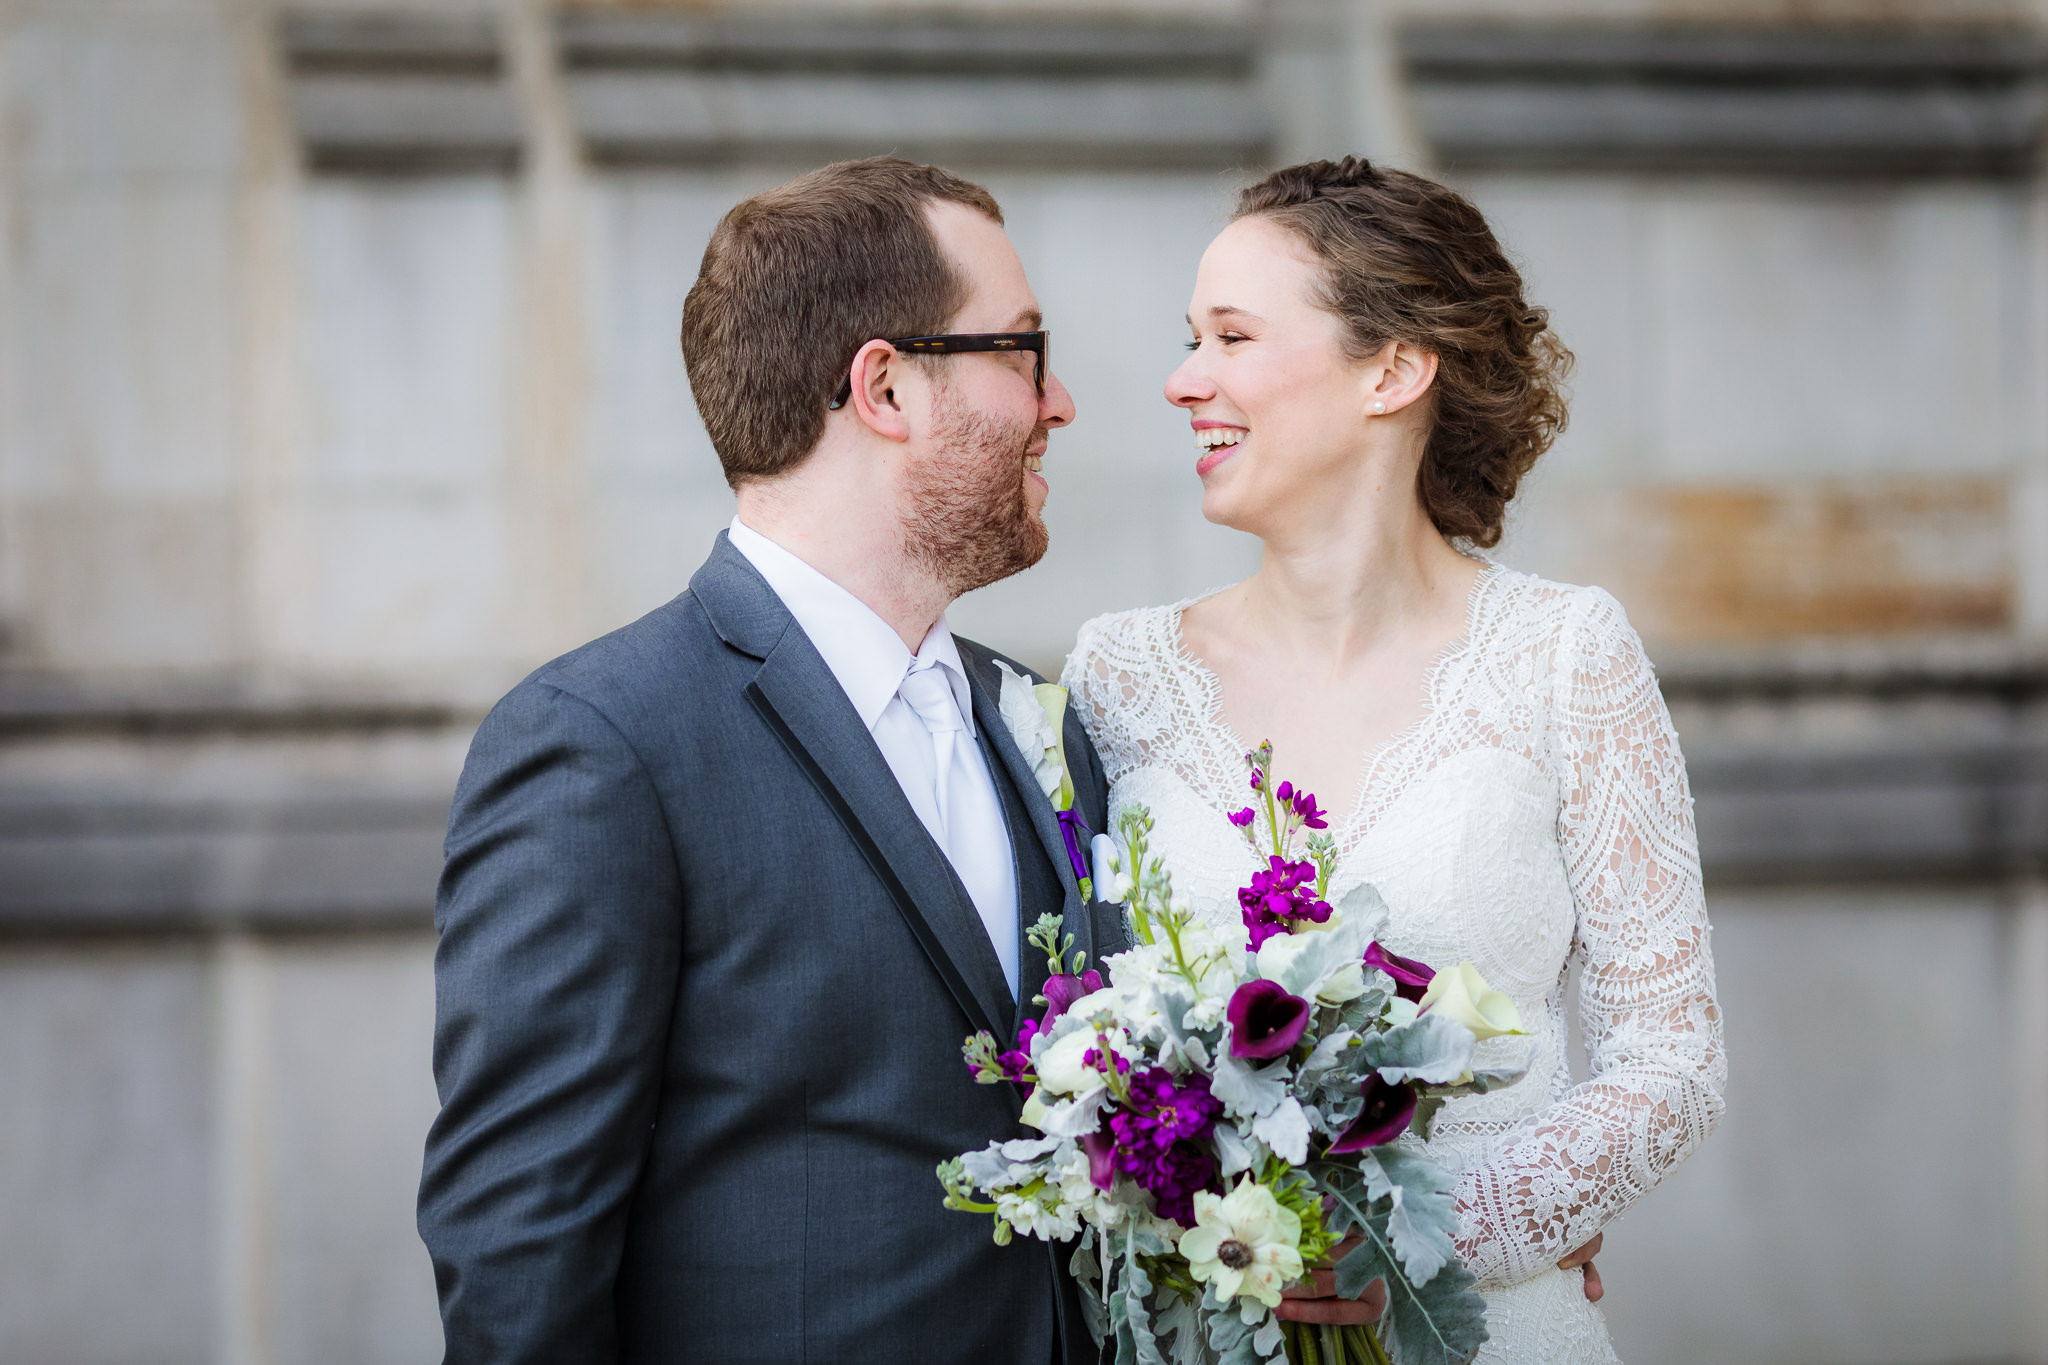 Bride & groom portraits at the Cathedral of Learning in Pittsburgh, PA